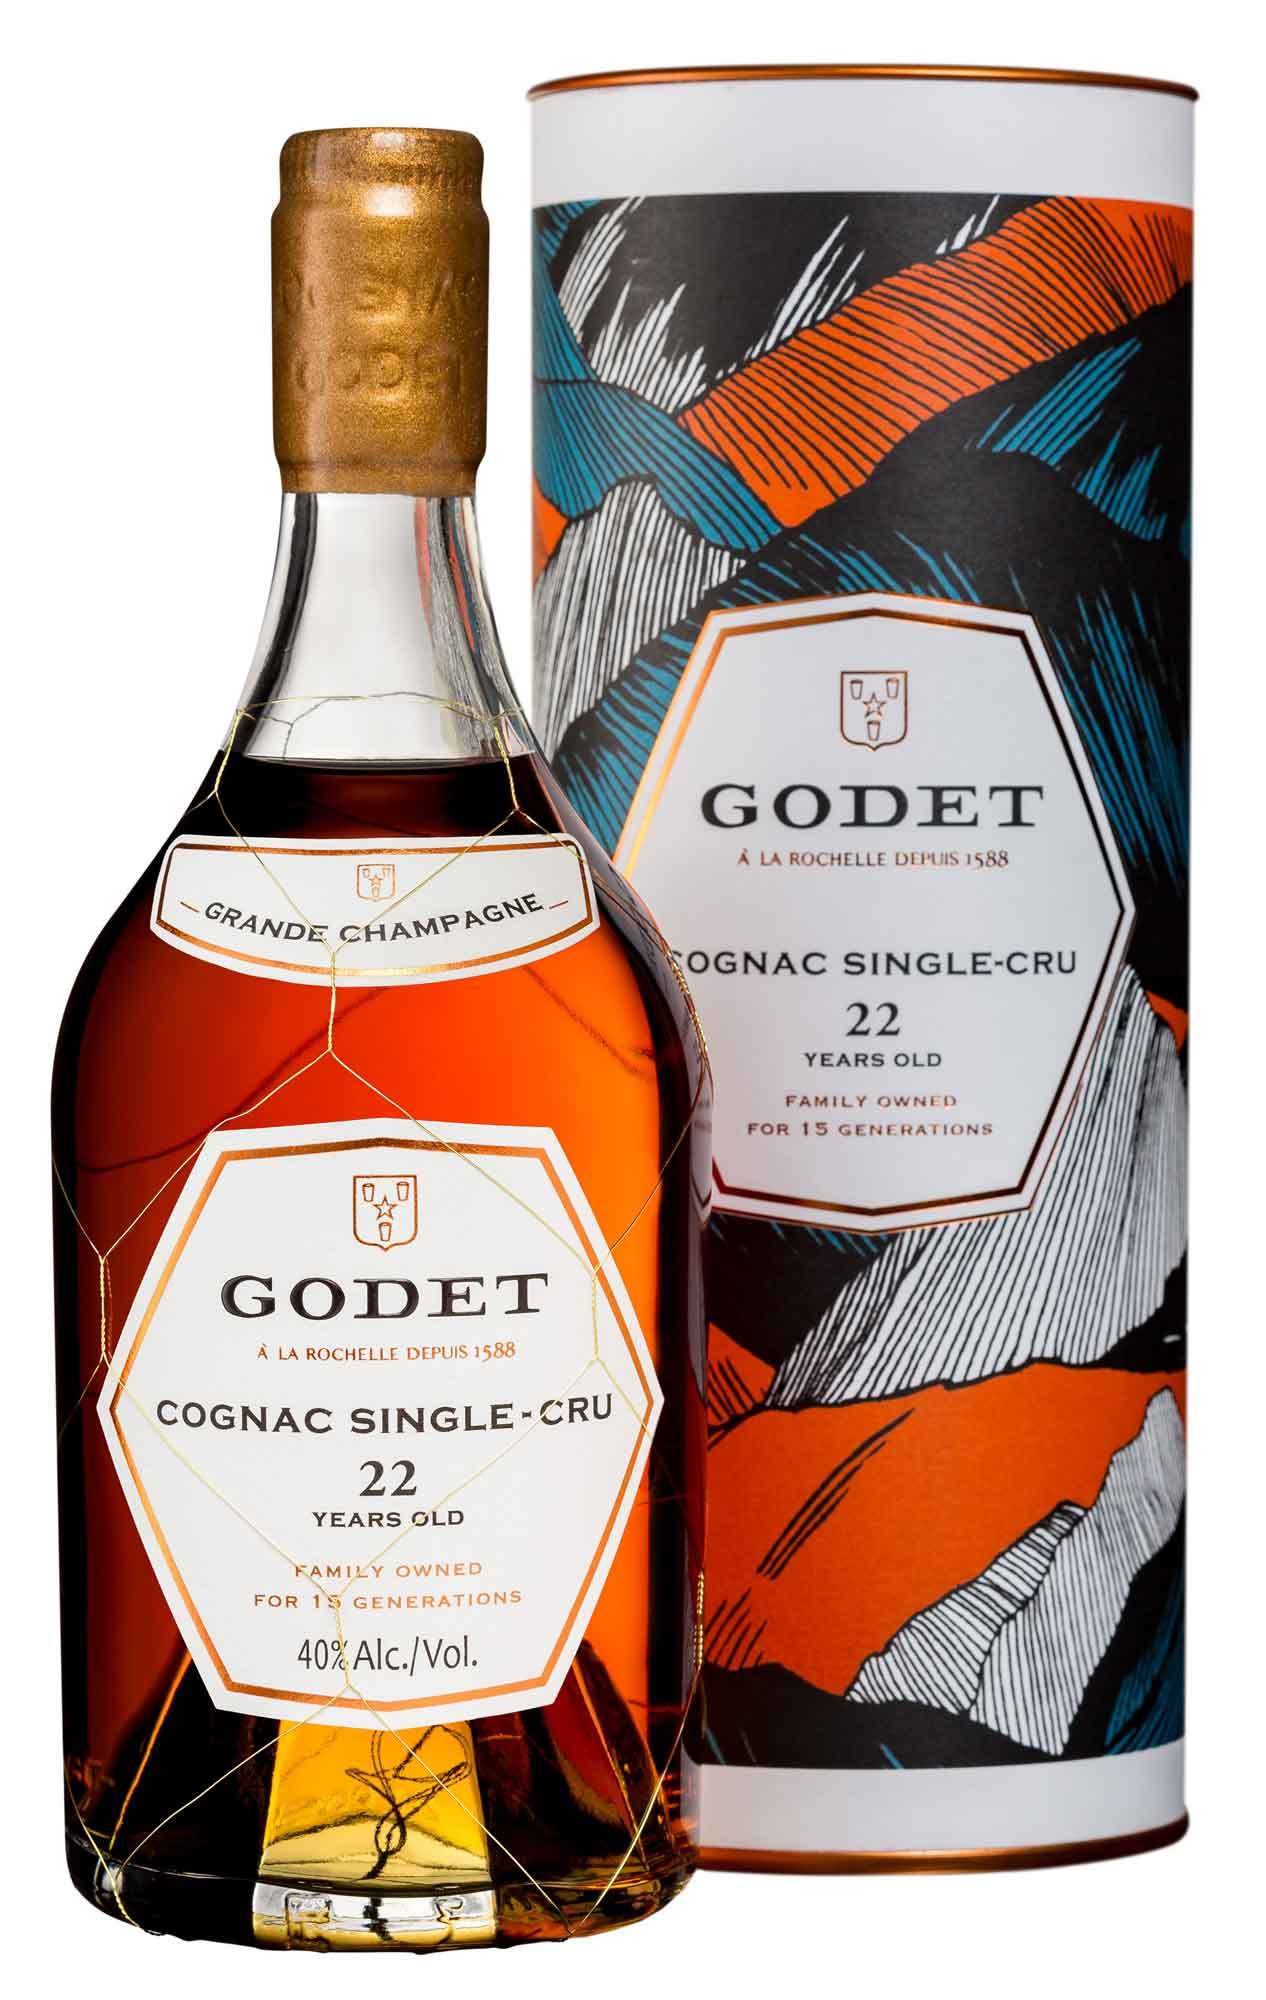 Godet Cognac: Making History With Each Generation